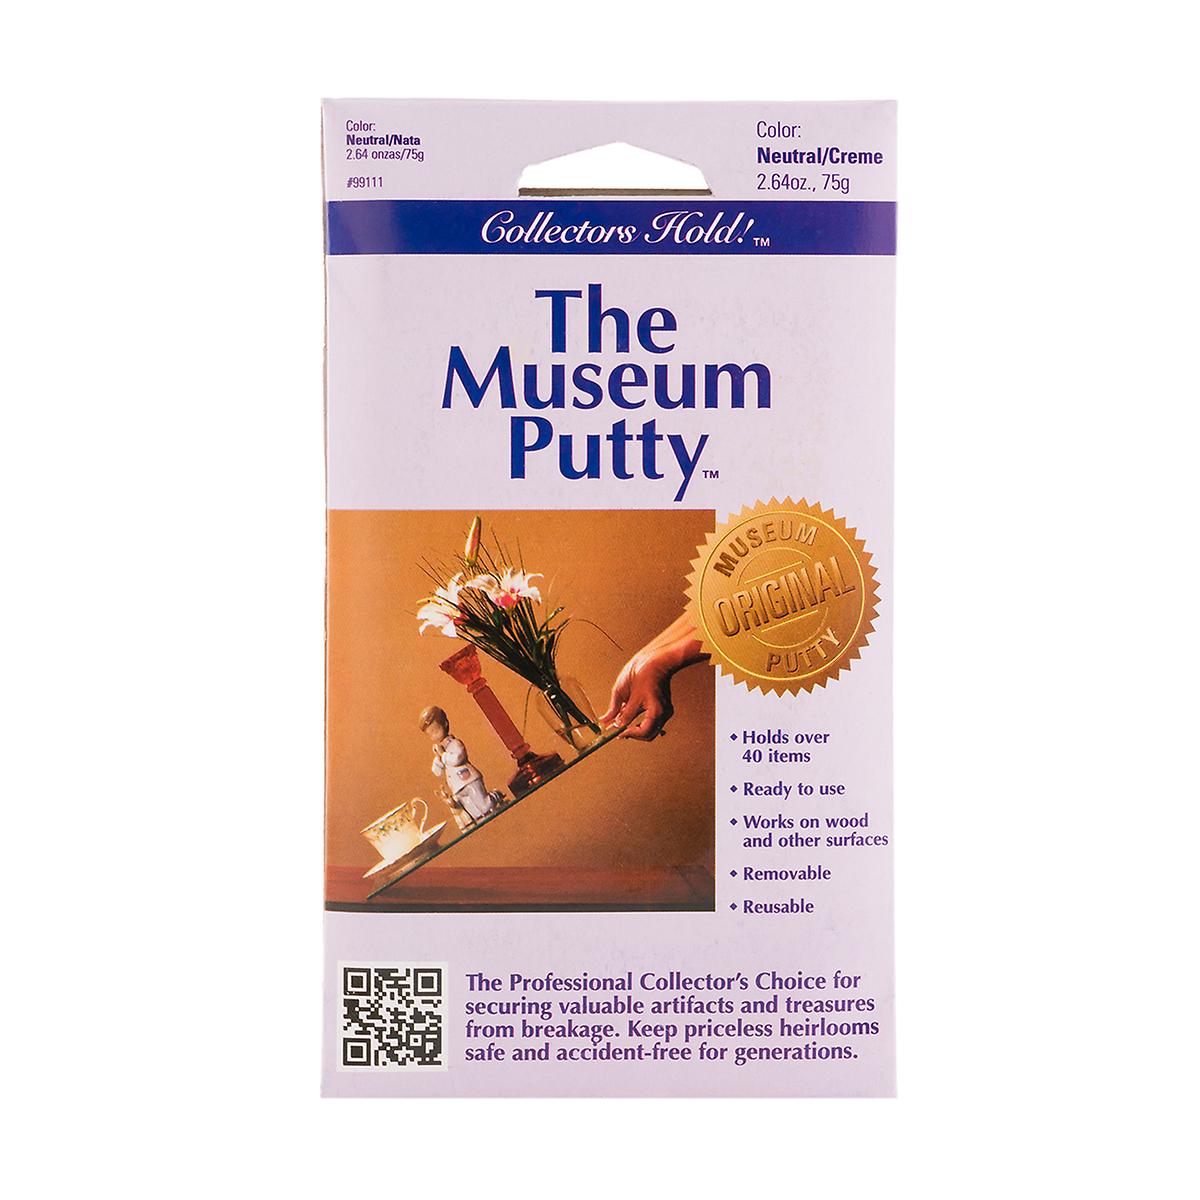 The Museum Putty